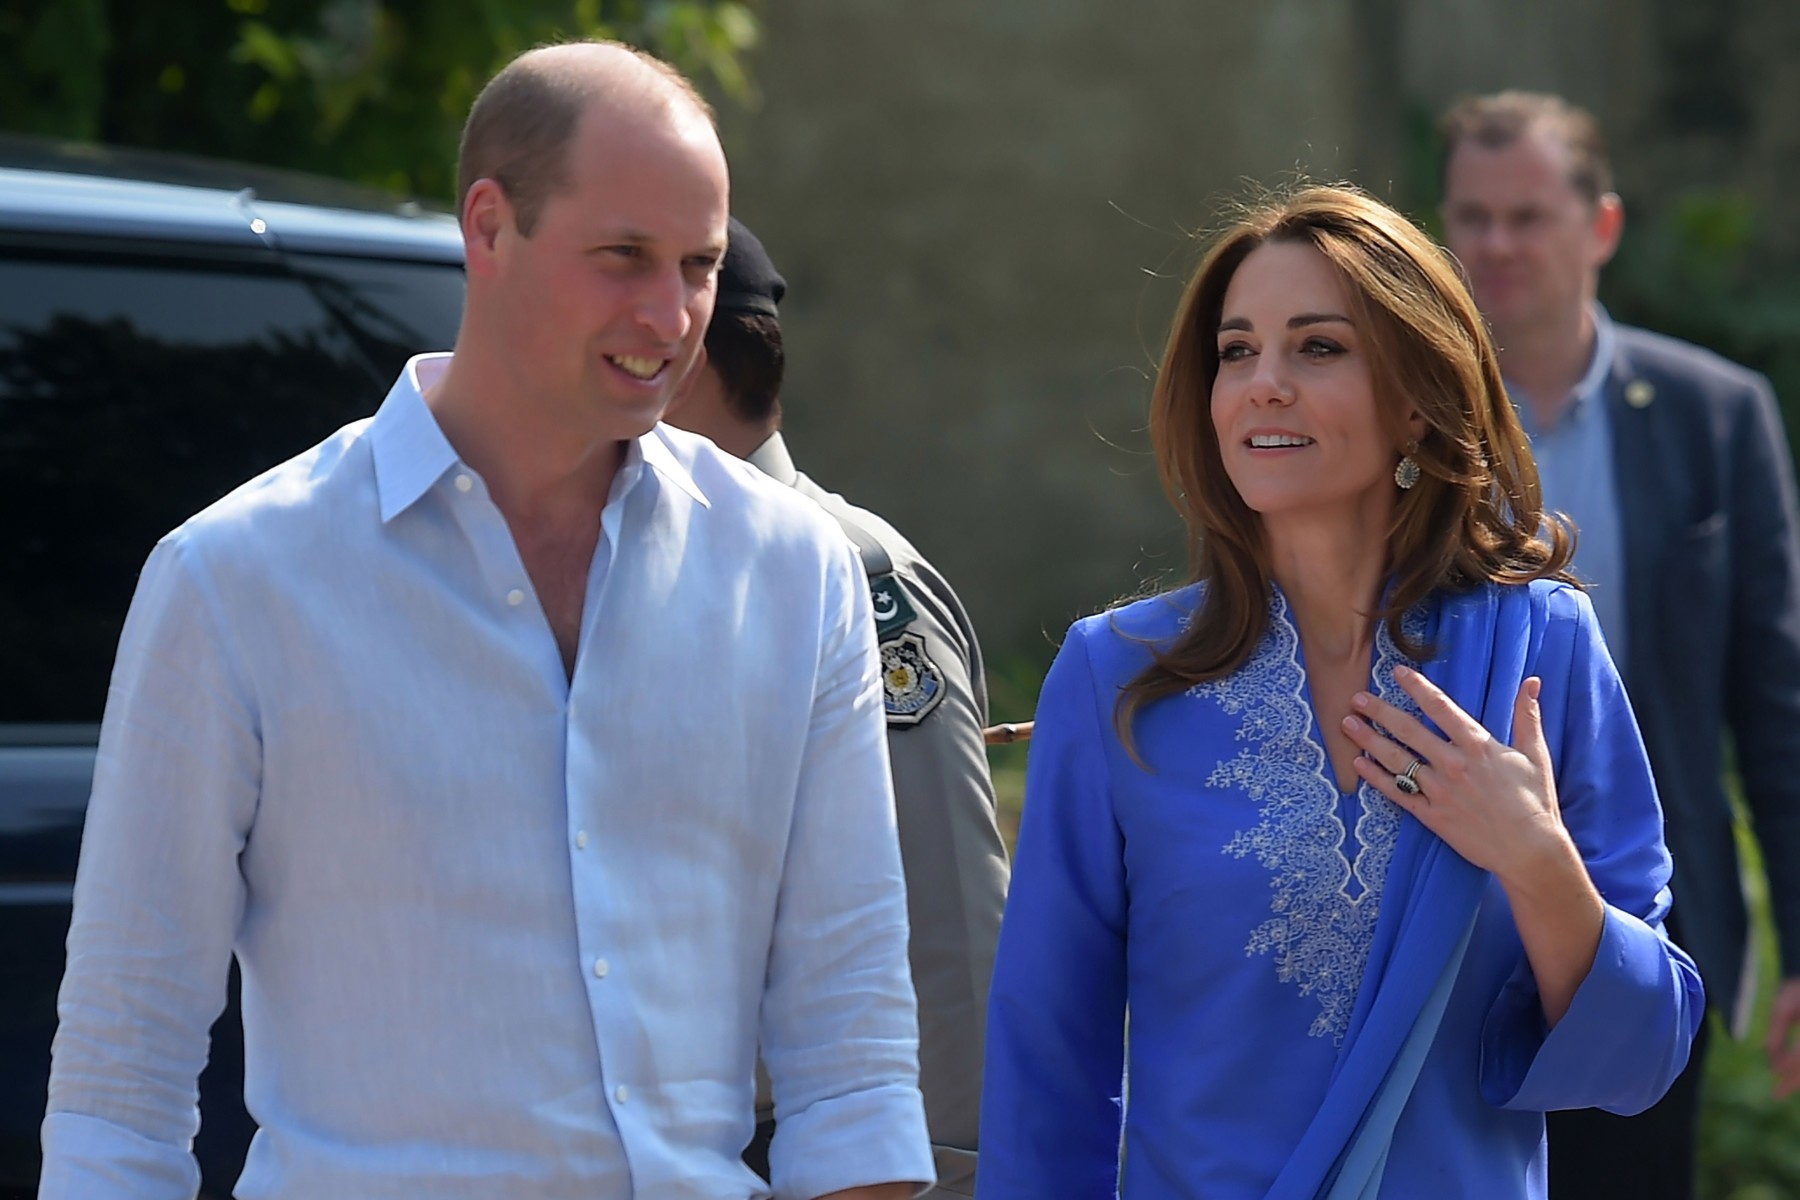 Prince William and Kate were gifted cricket bats while in Pakistan